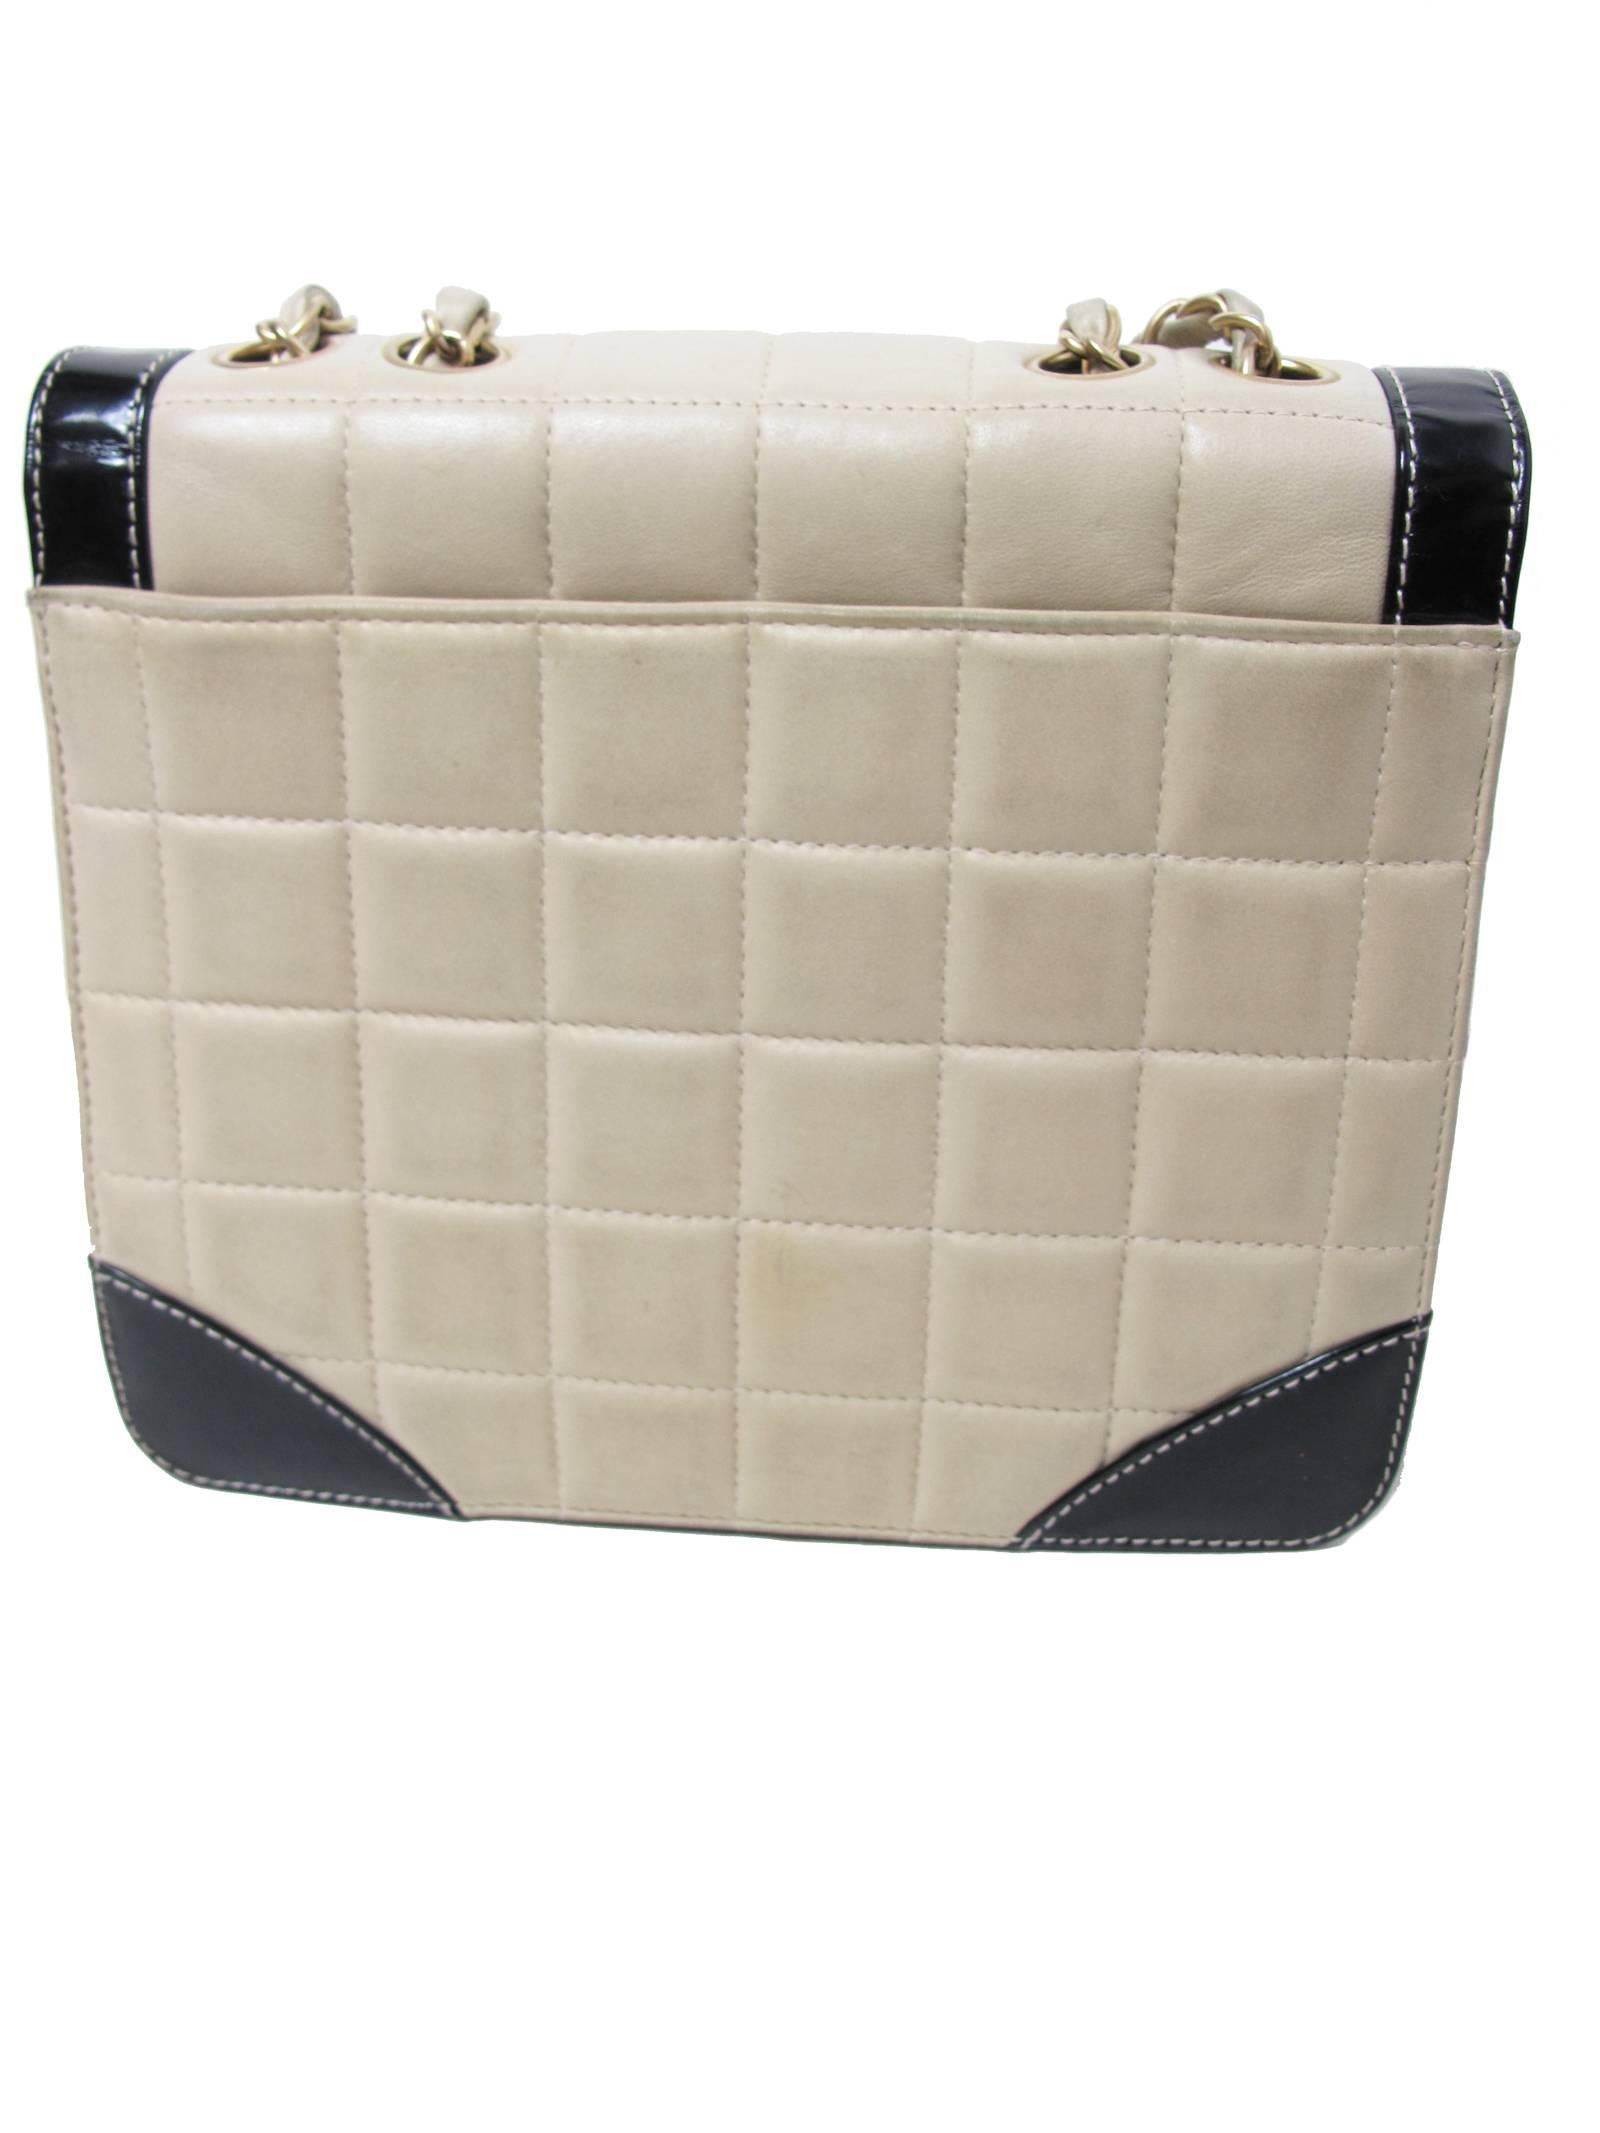 Chanel Quilted Leather and Patent Bag - Sale 1